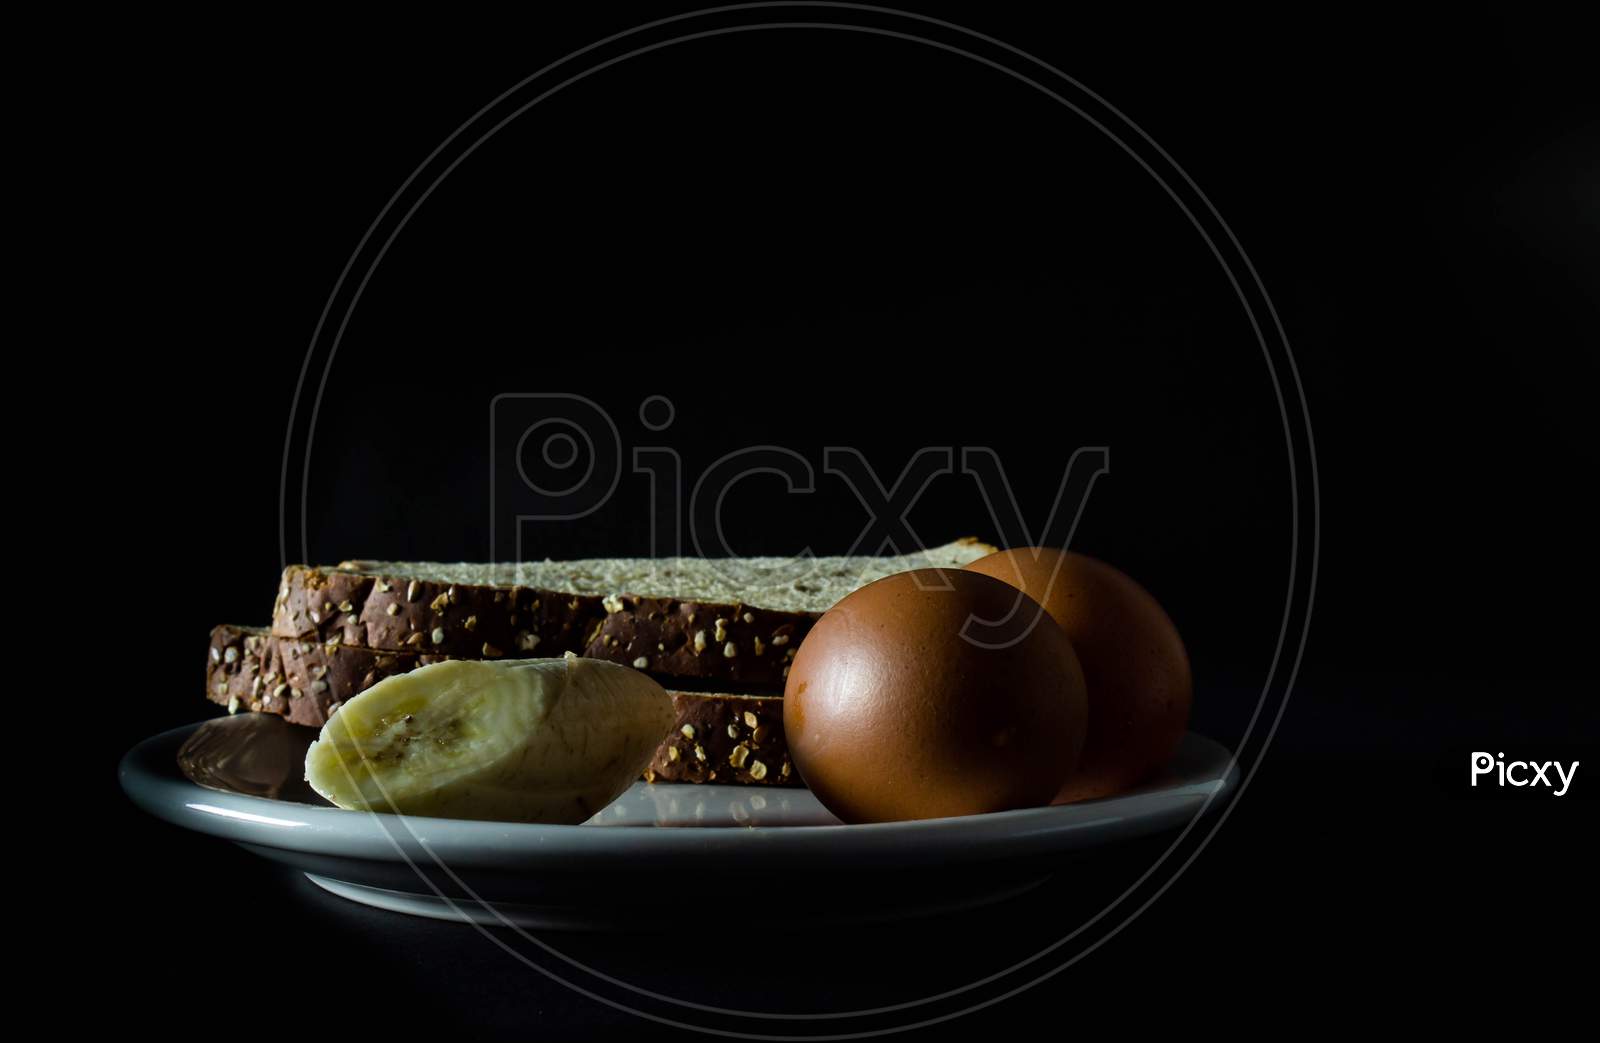 Varied Food To Prepare A Healthy Breakfast. Neutral Black Background With Pictorial Lighting. Healthy Diet Without Fats.